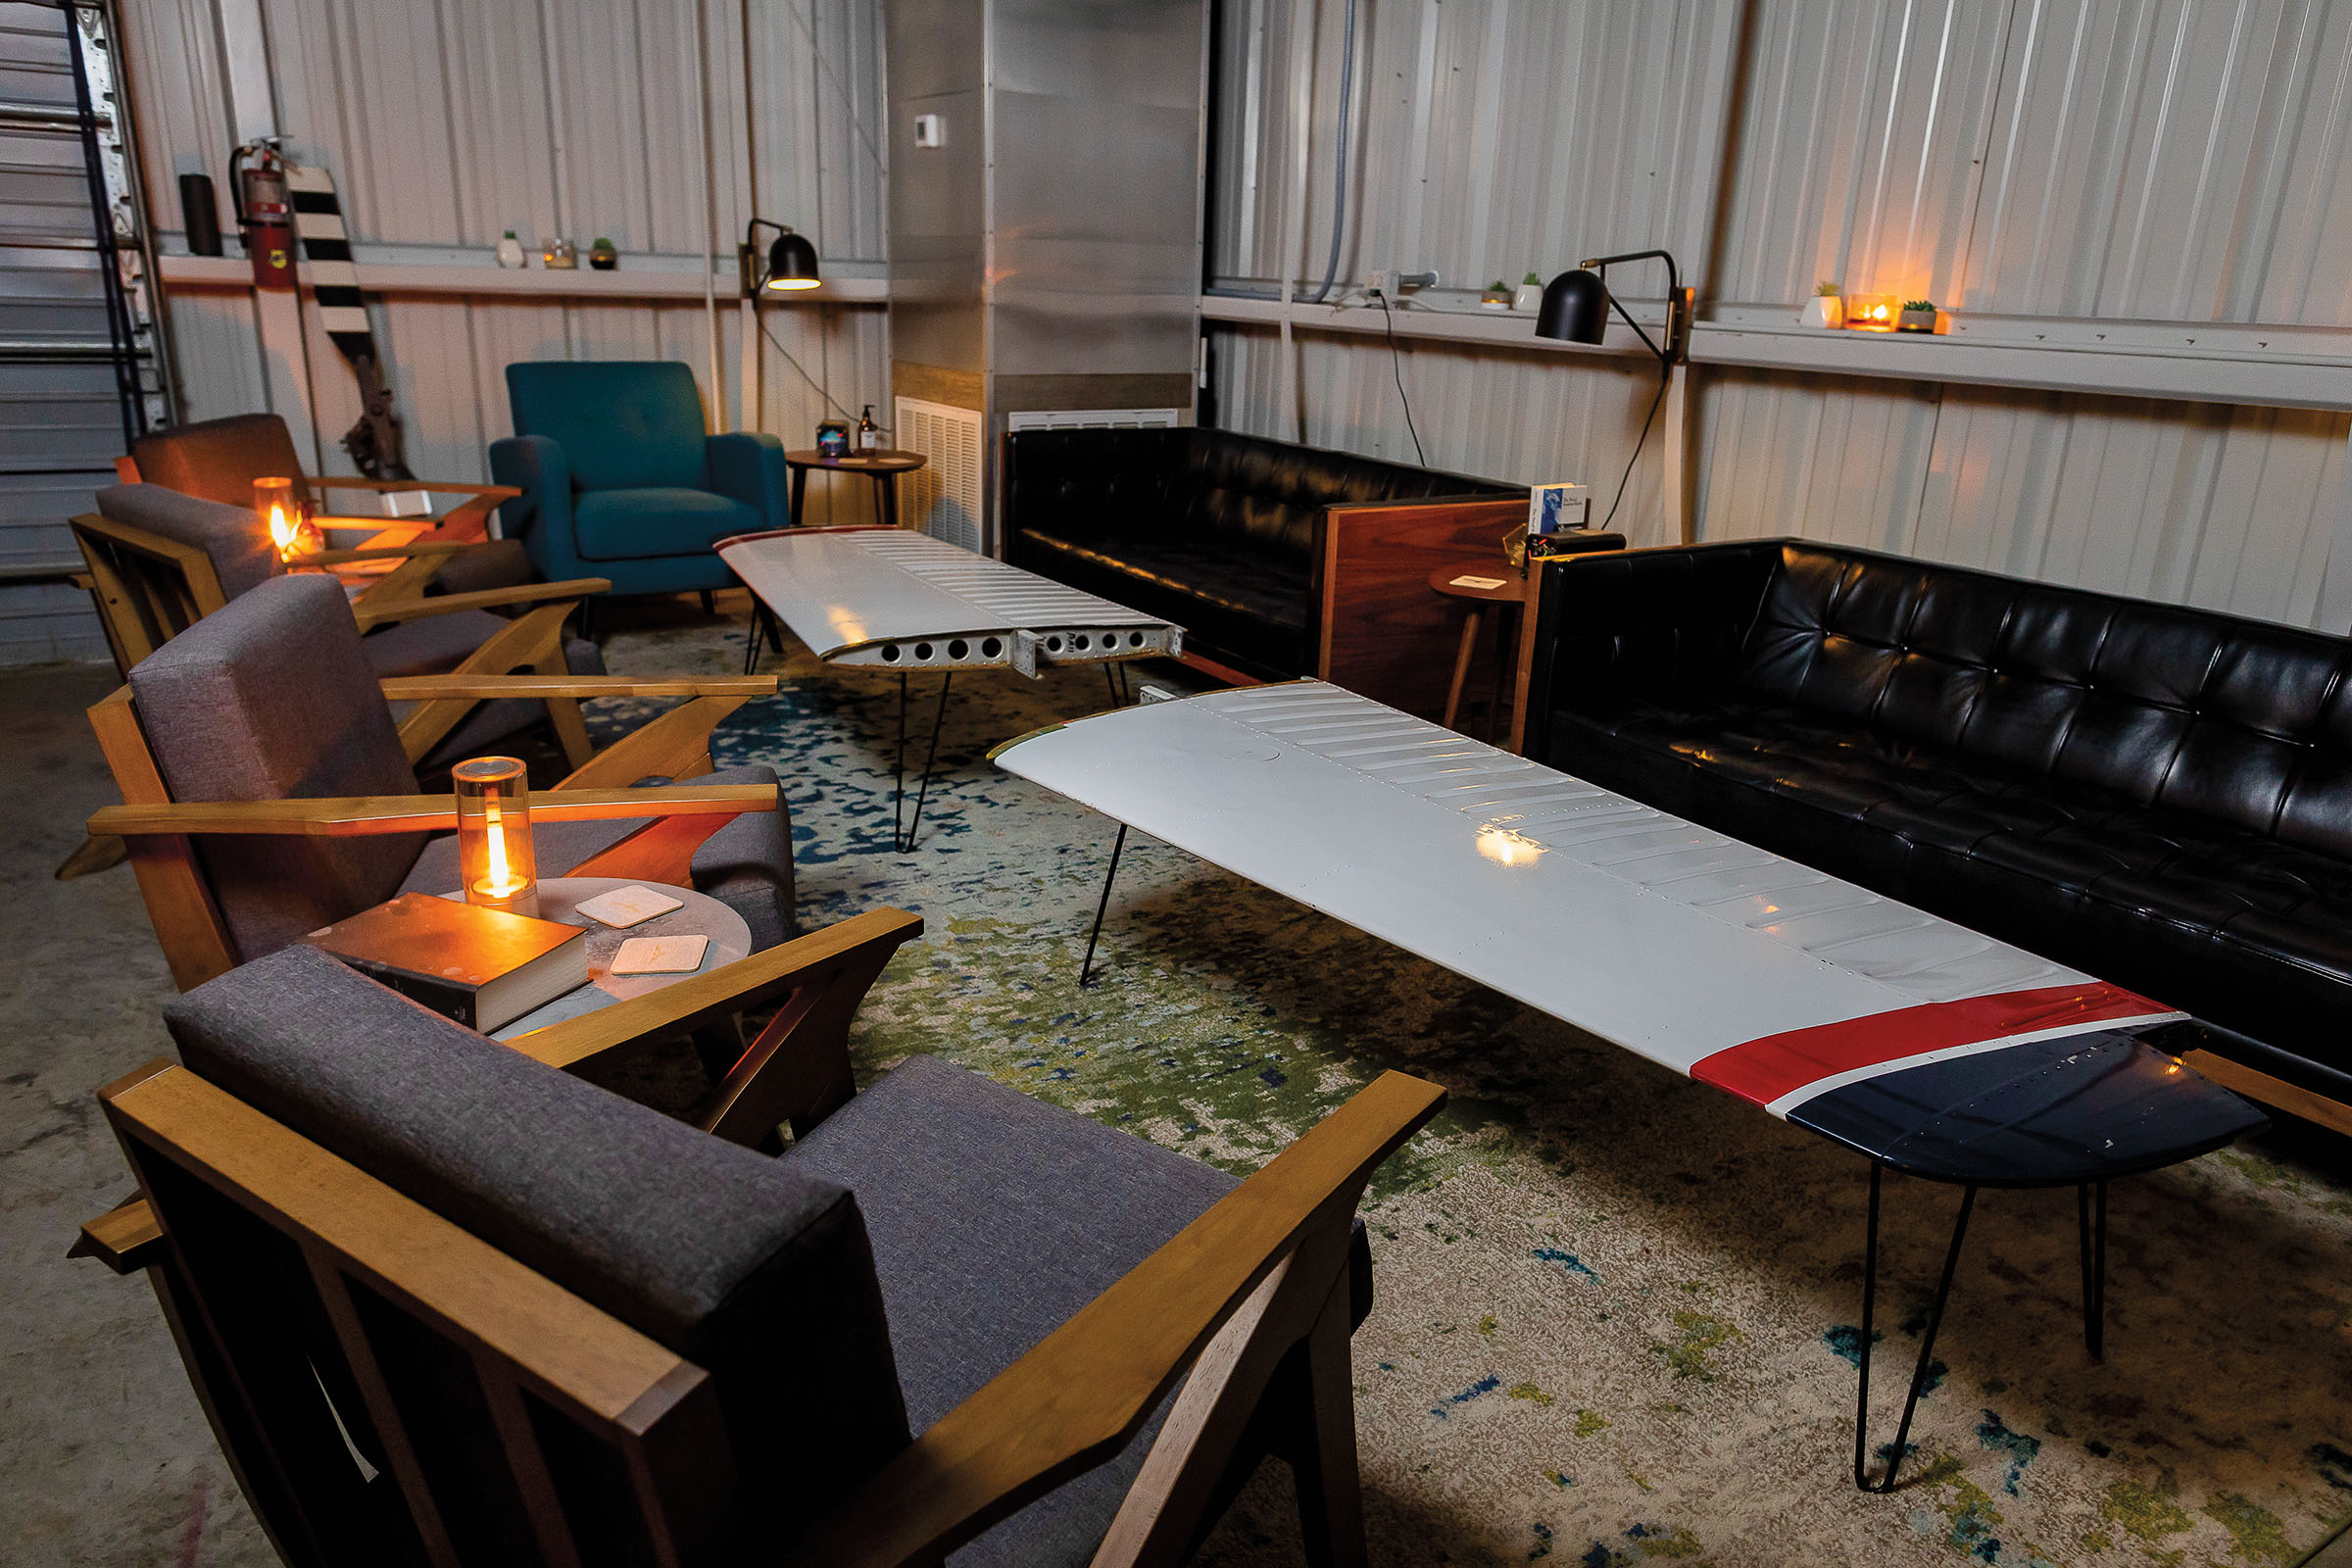 A plushly-decorated seating area with tables made from airplane wings and modern couches and chairs